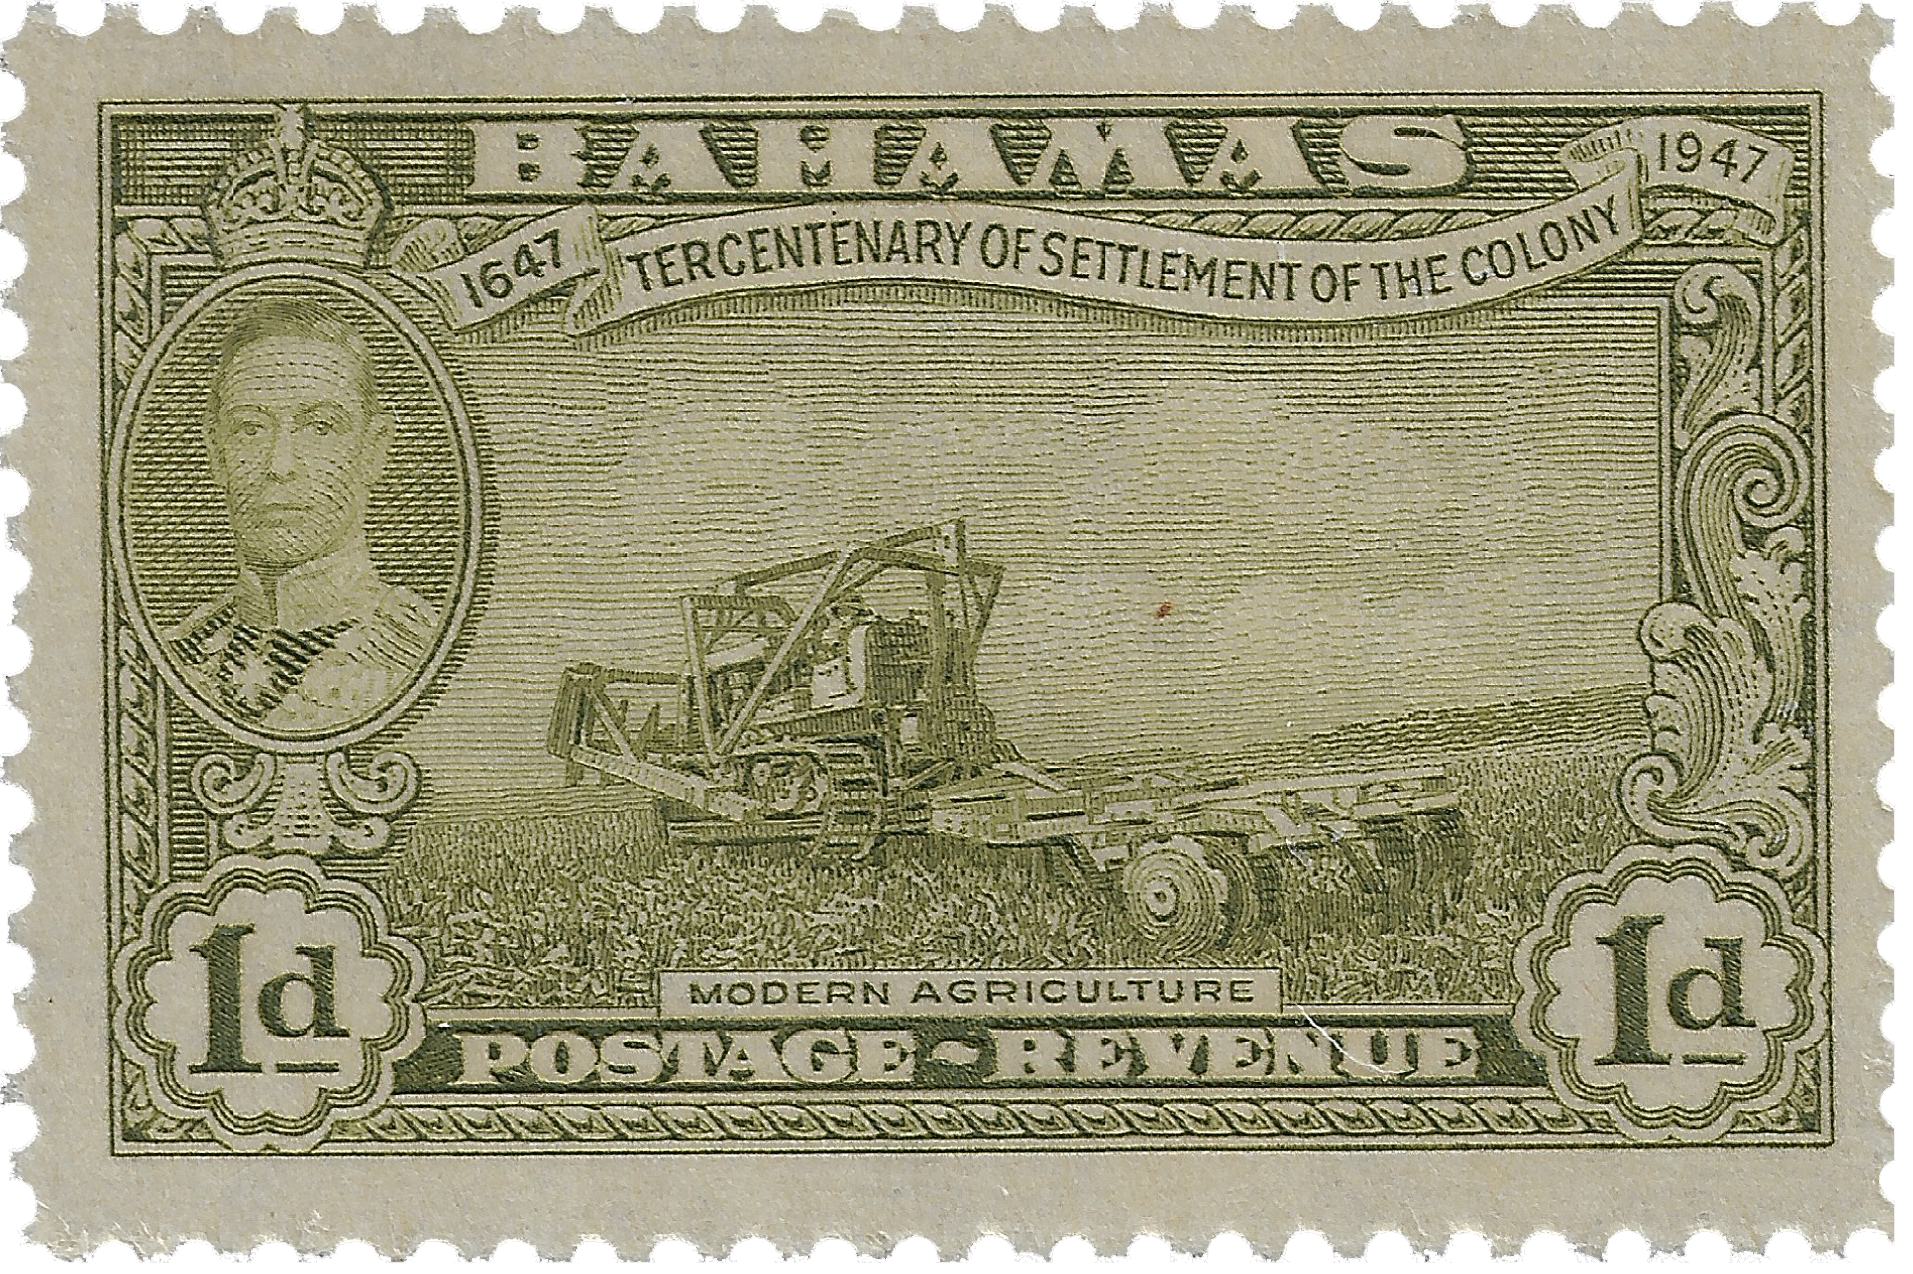 1d 1948, 1647 Tercentenary of Settlement of the Colony, Modern Agriculture